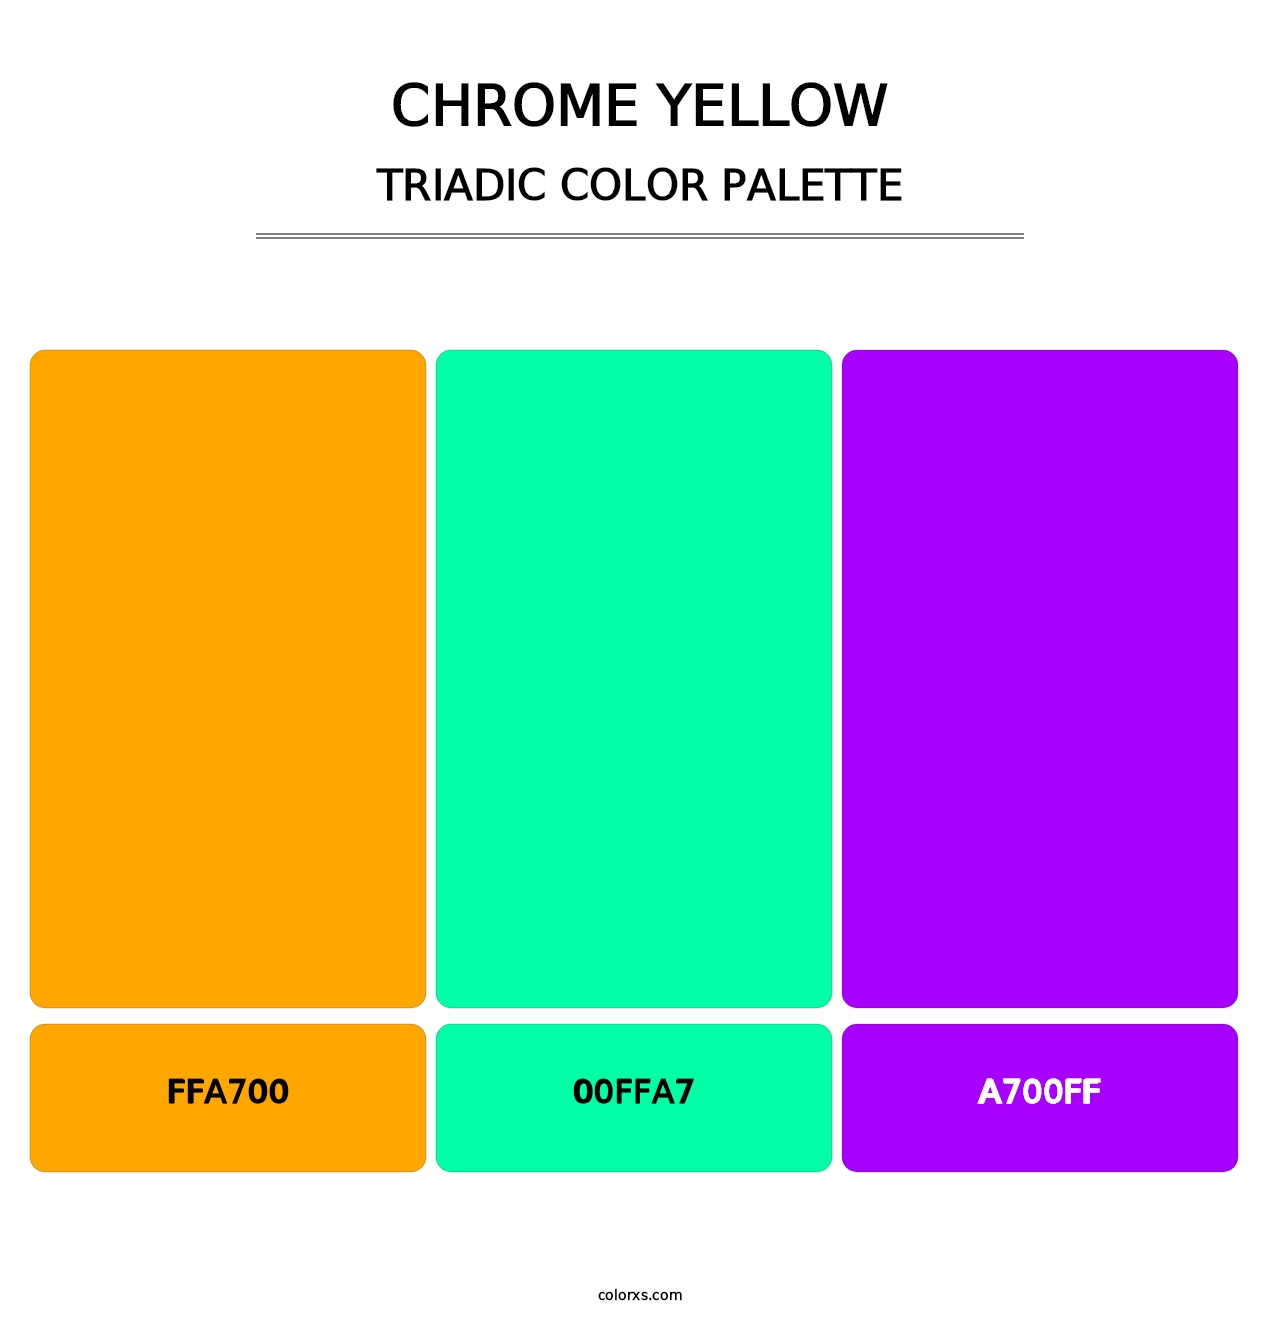 Chrome Yellow - Triadic Color Palette